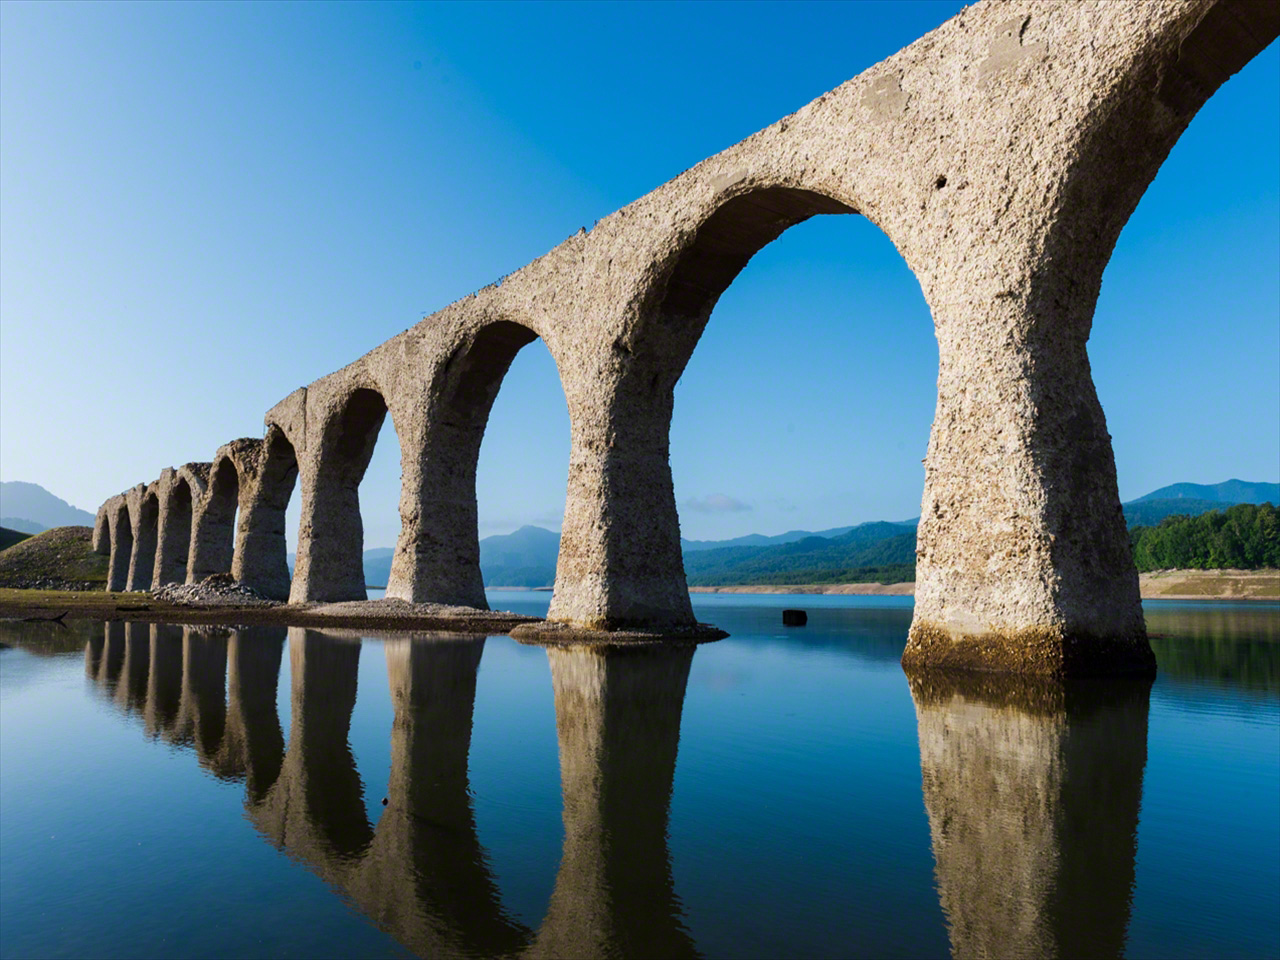 The arches reflect in the water on a windless July morning, lending the span its other nickname, the “spectacle bridge.”